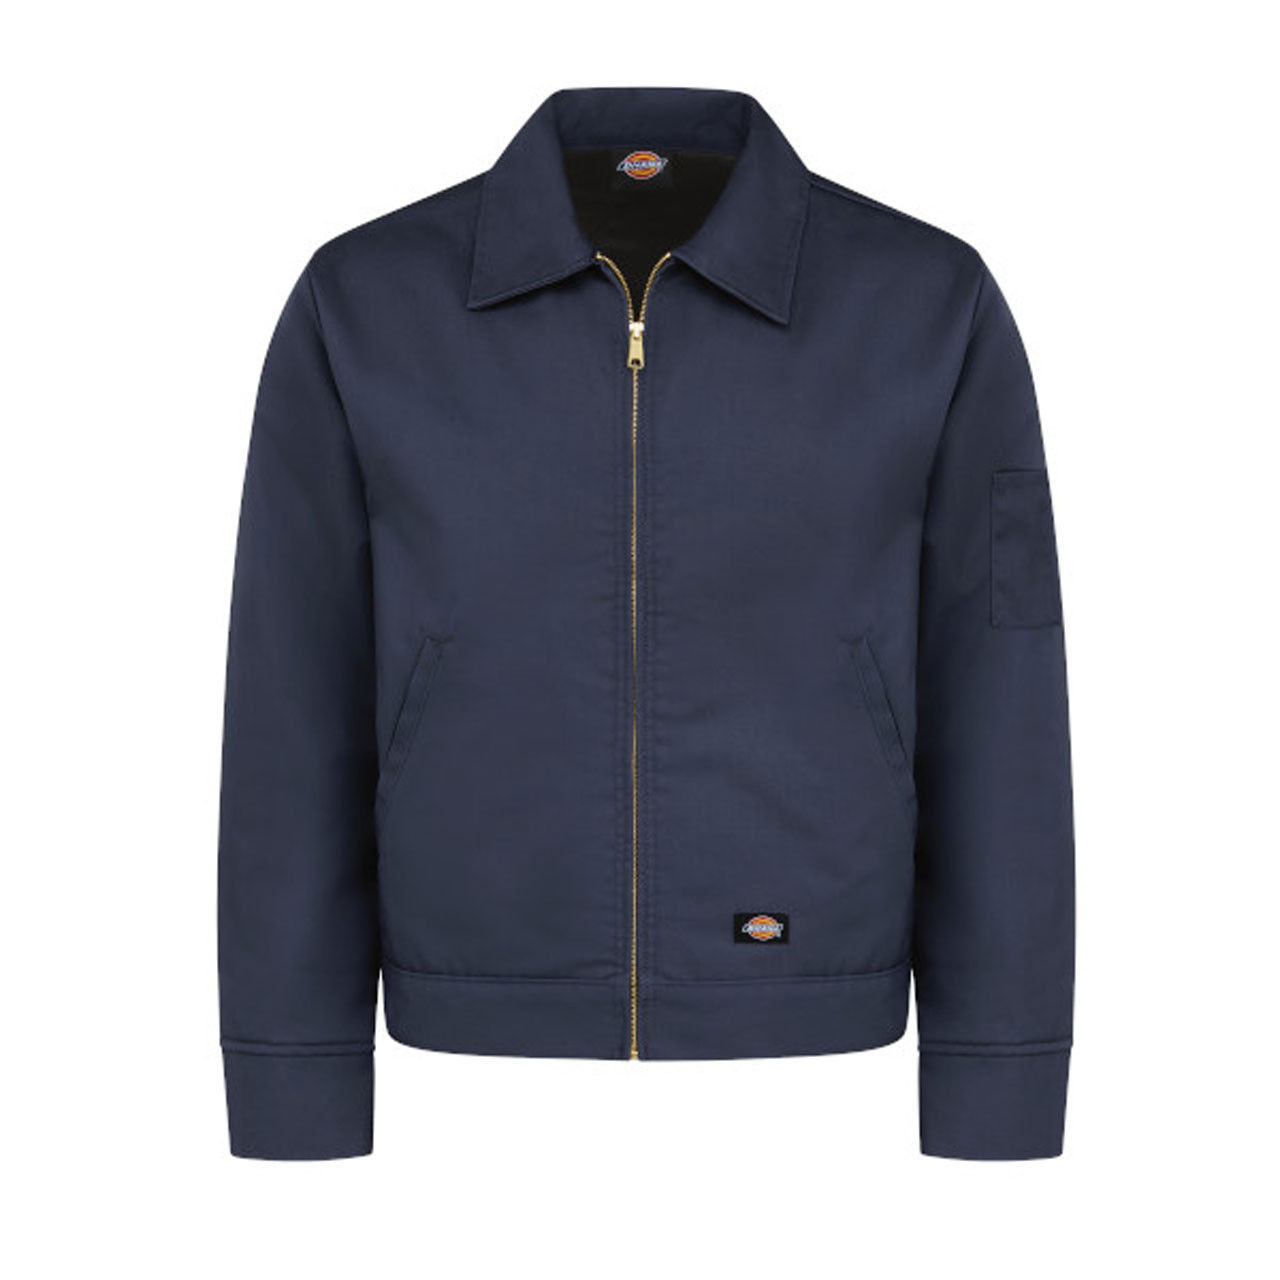 What is the material of the Dickies Eisenhower Jacket's exterior shell?